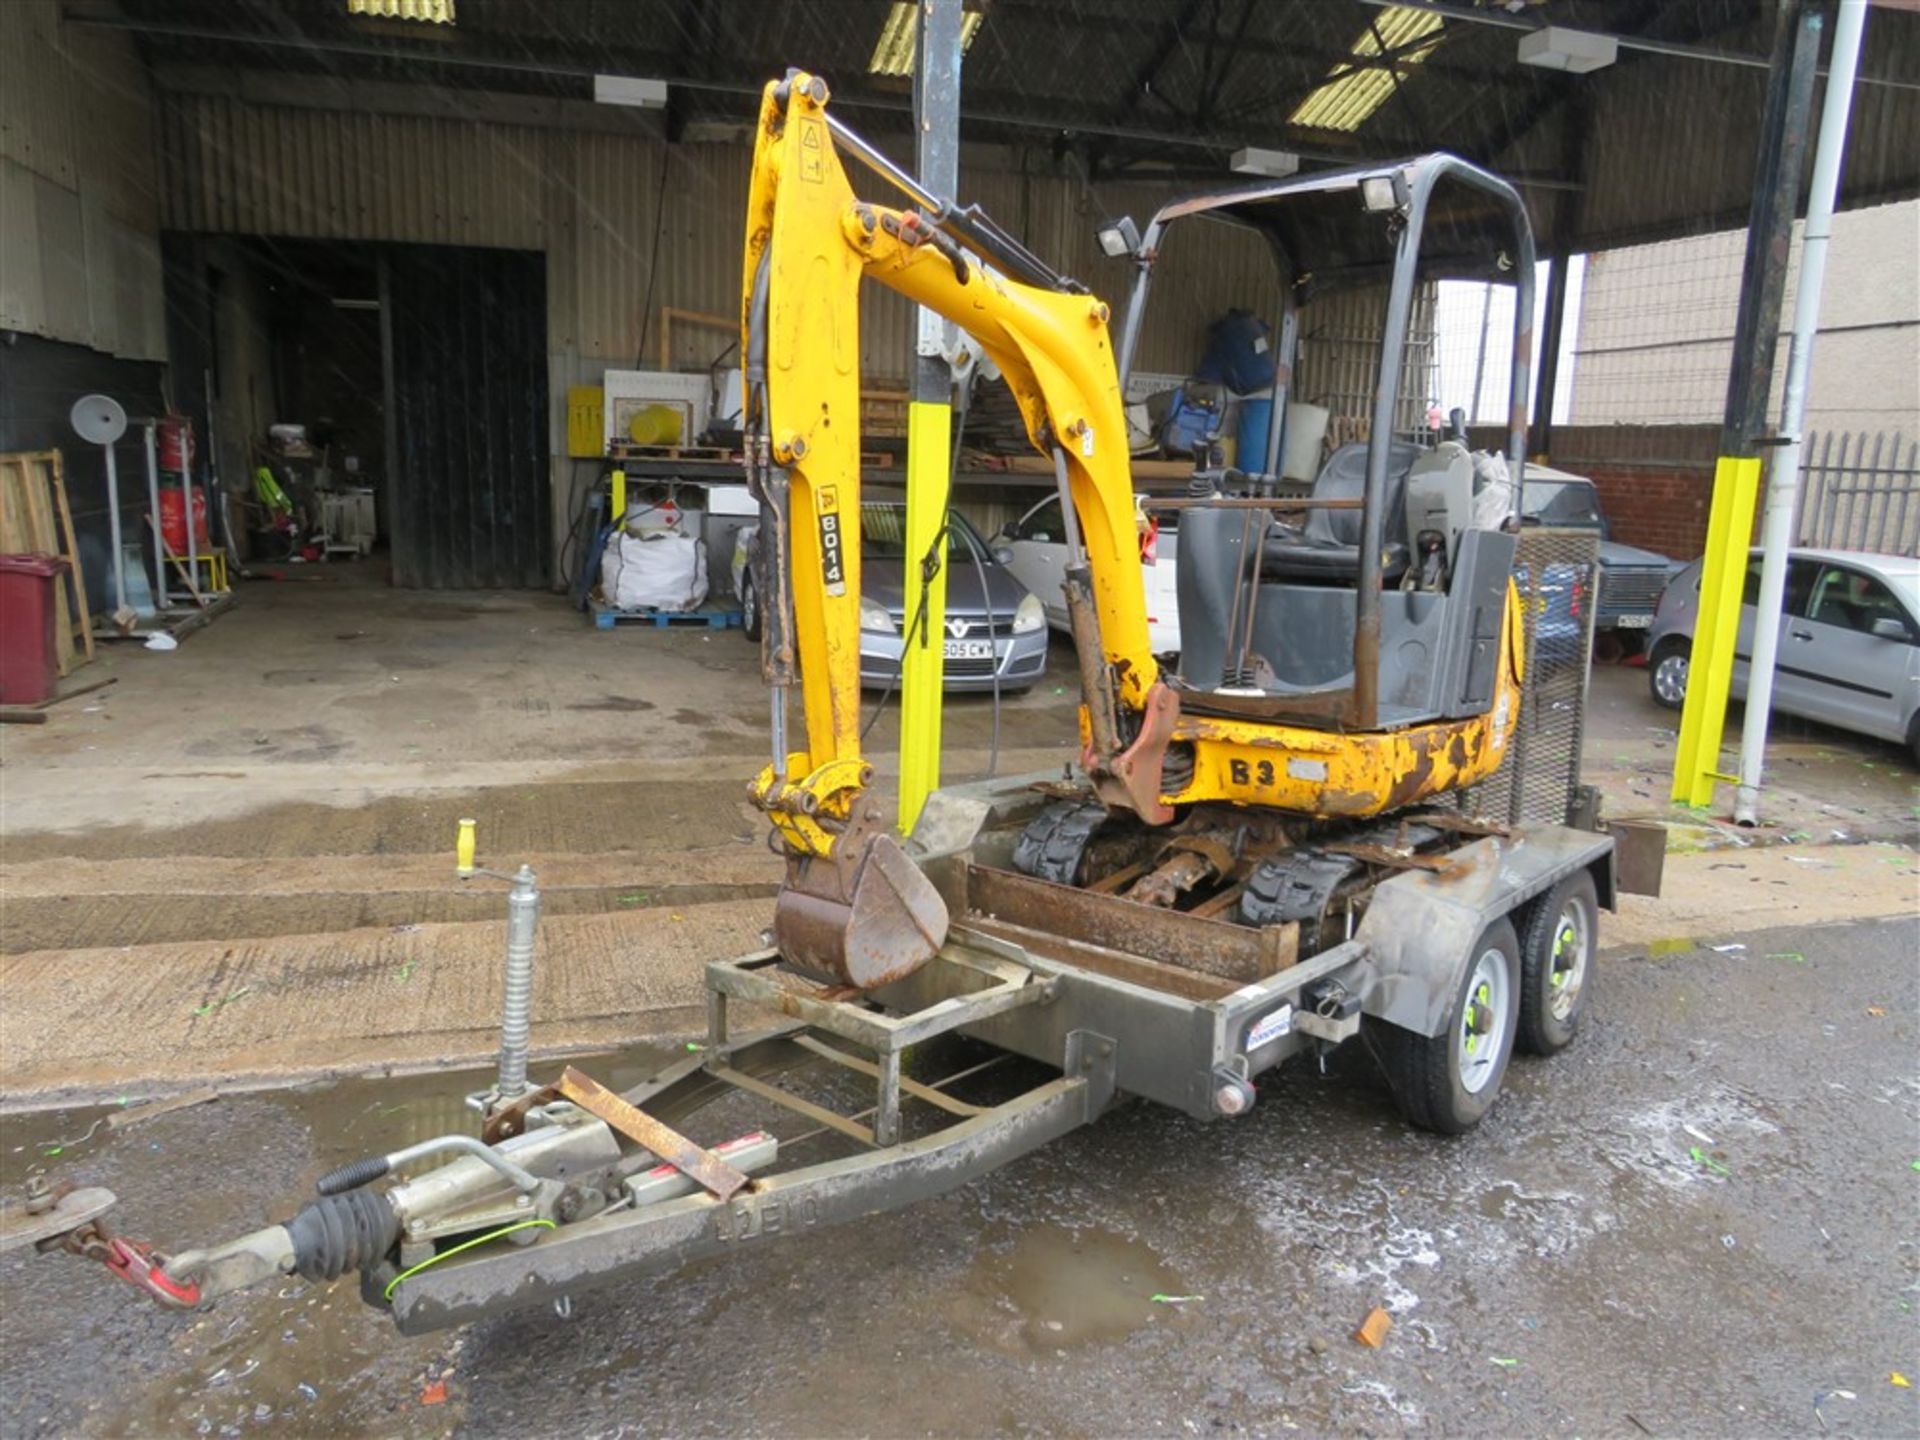 2010 JCB 801.4 MINI DIGGER C/W TRAILER (DIRECT ELECTRICITY NW) 2708 HOURS [+ VAT] - Image 2 of 4